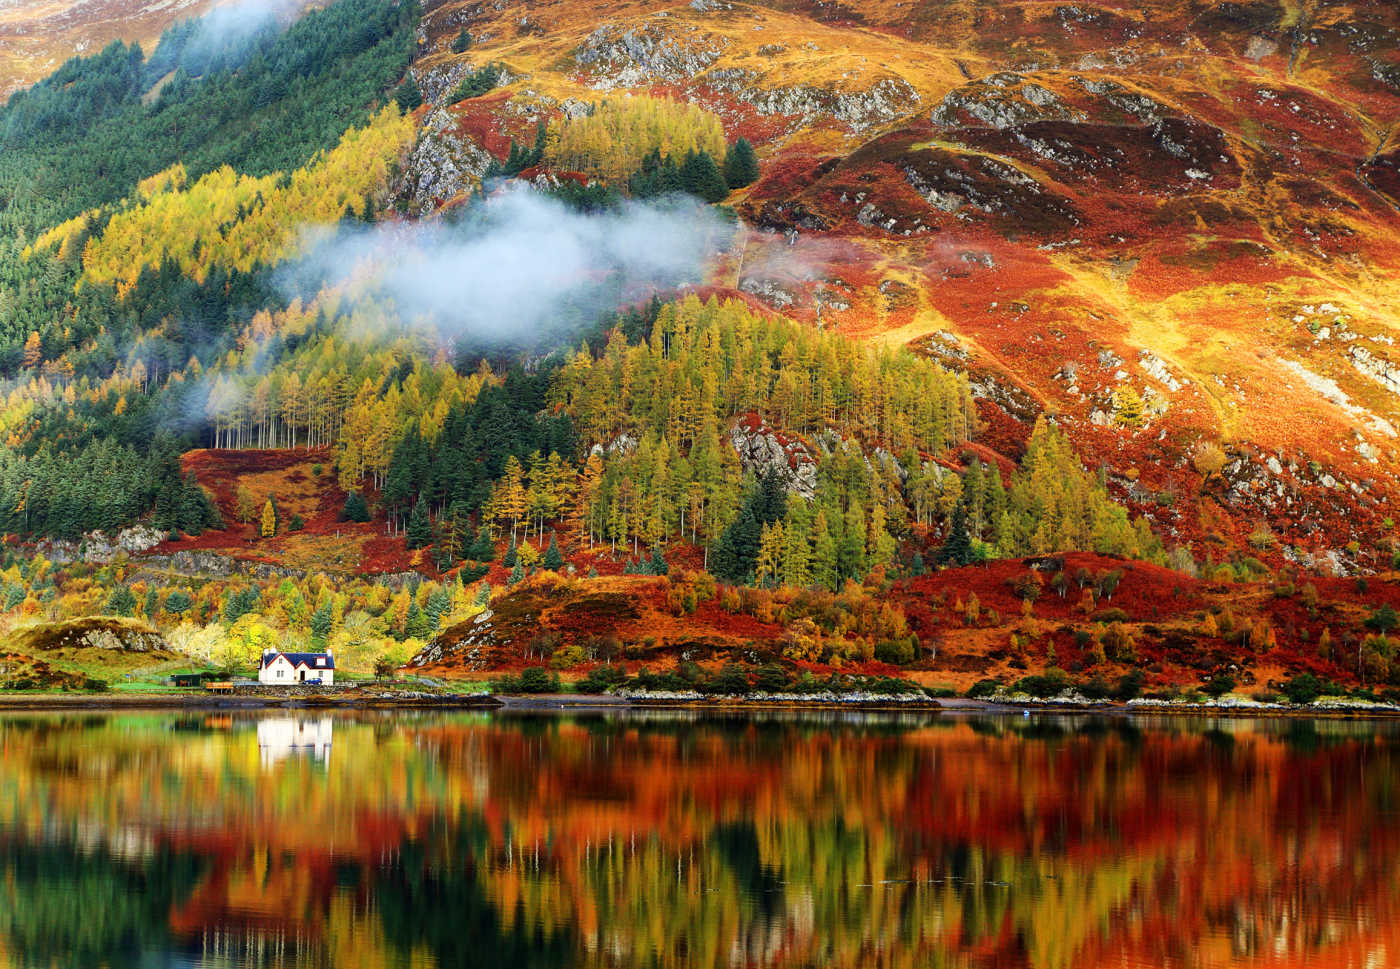 Best places to go for fall: A dozen cool spots around the world